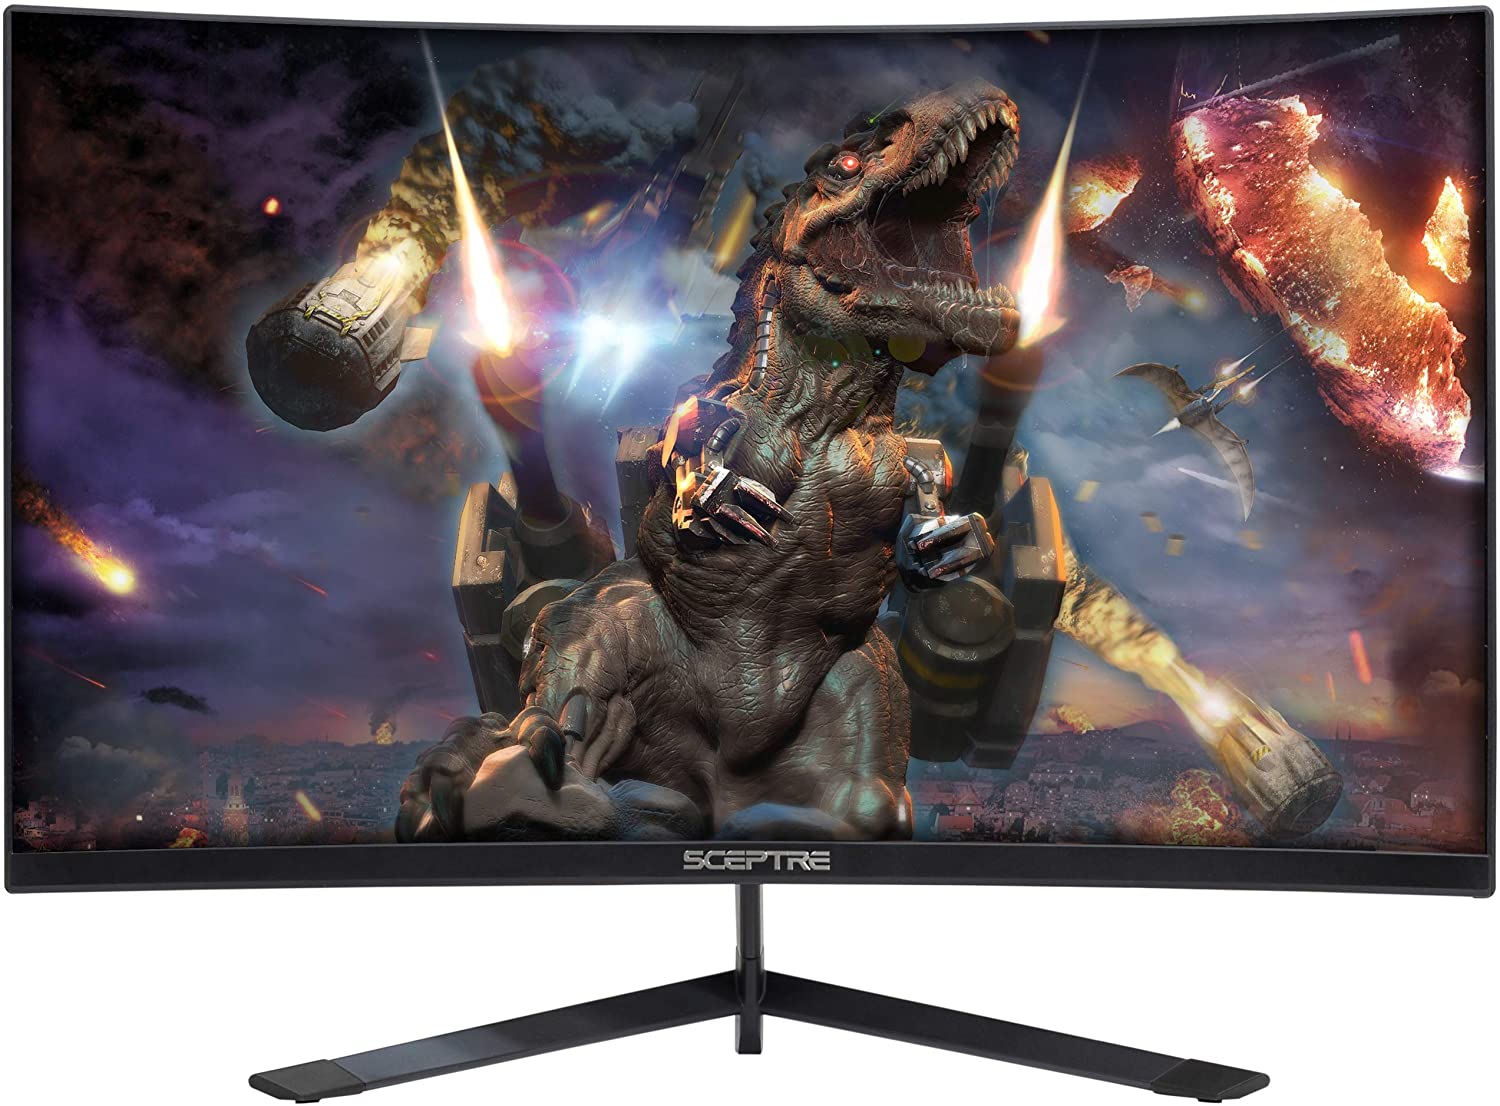 Sceptre 24in Curved Gaming Monitor Render